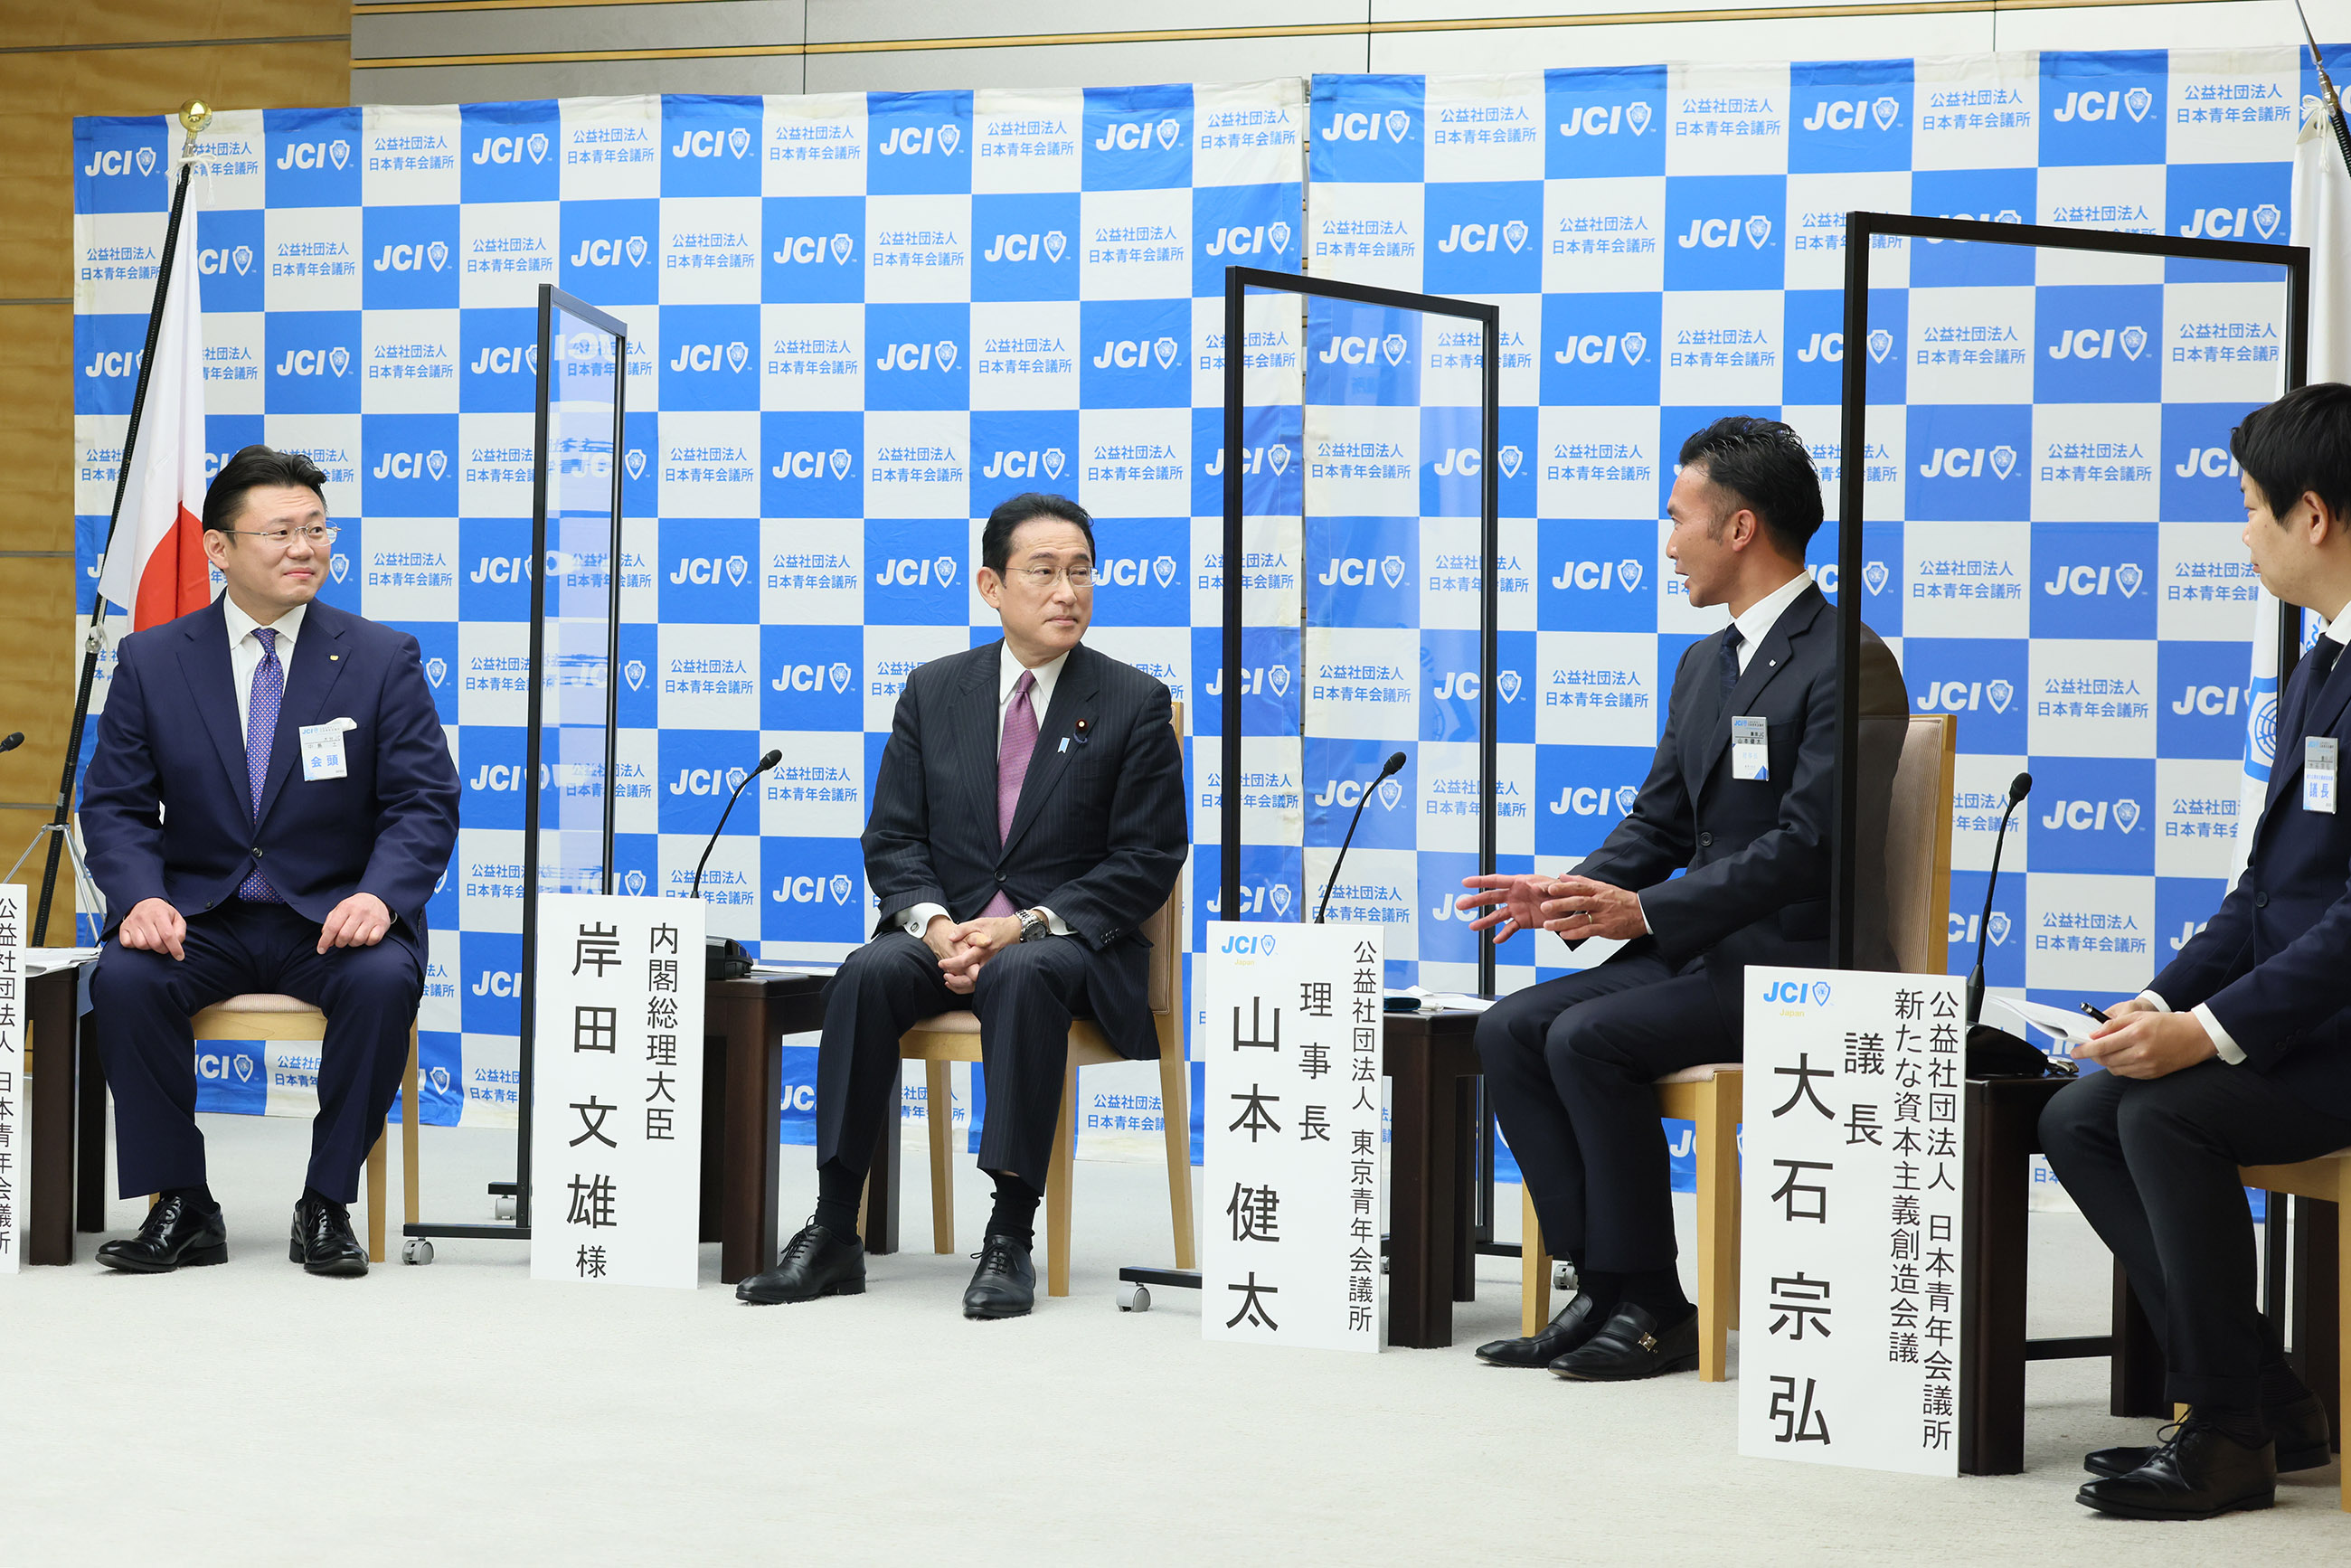 Photograph of the Prime Minister listening to other participants at a roundtable talk (2)